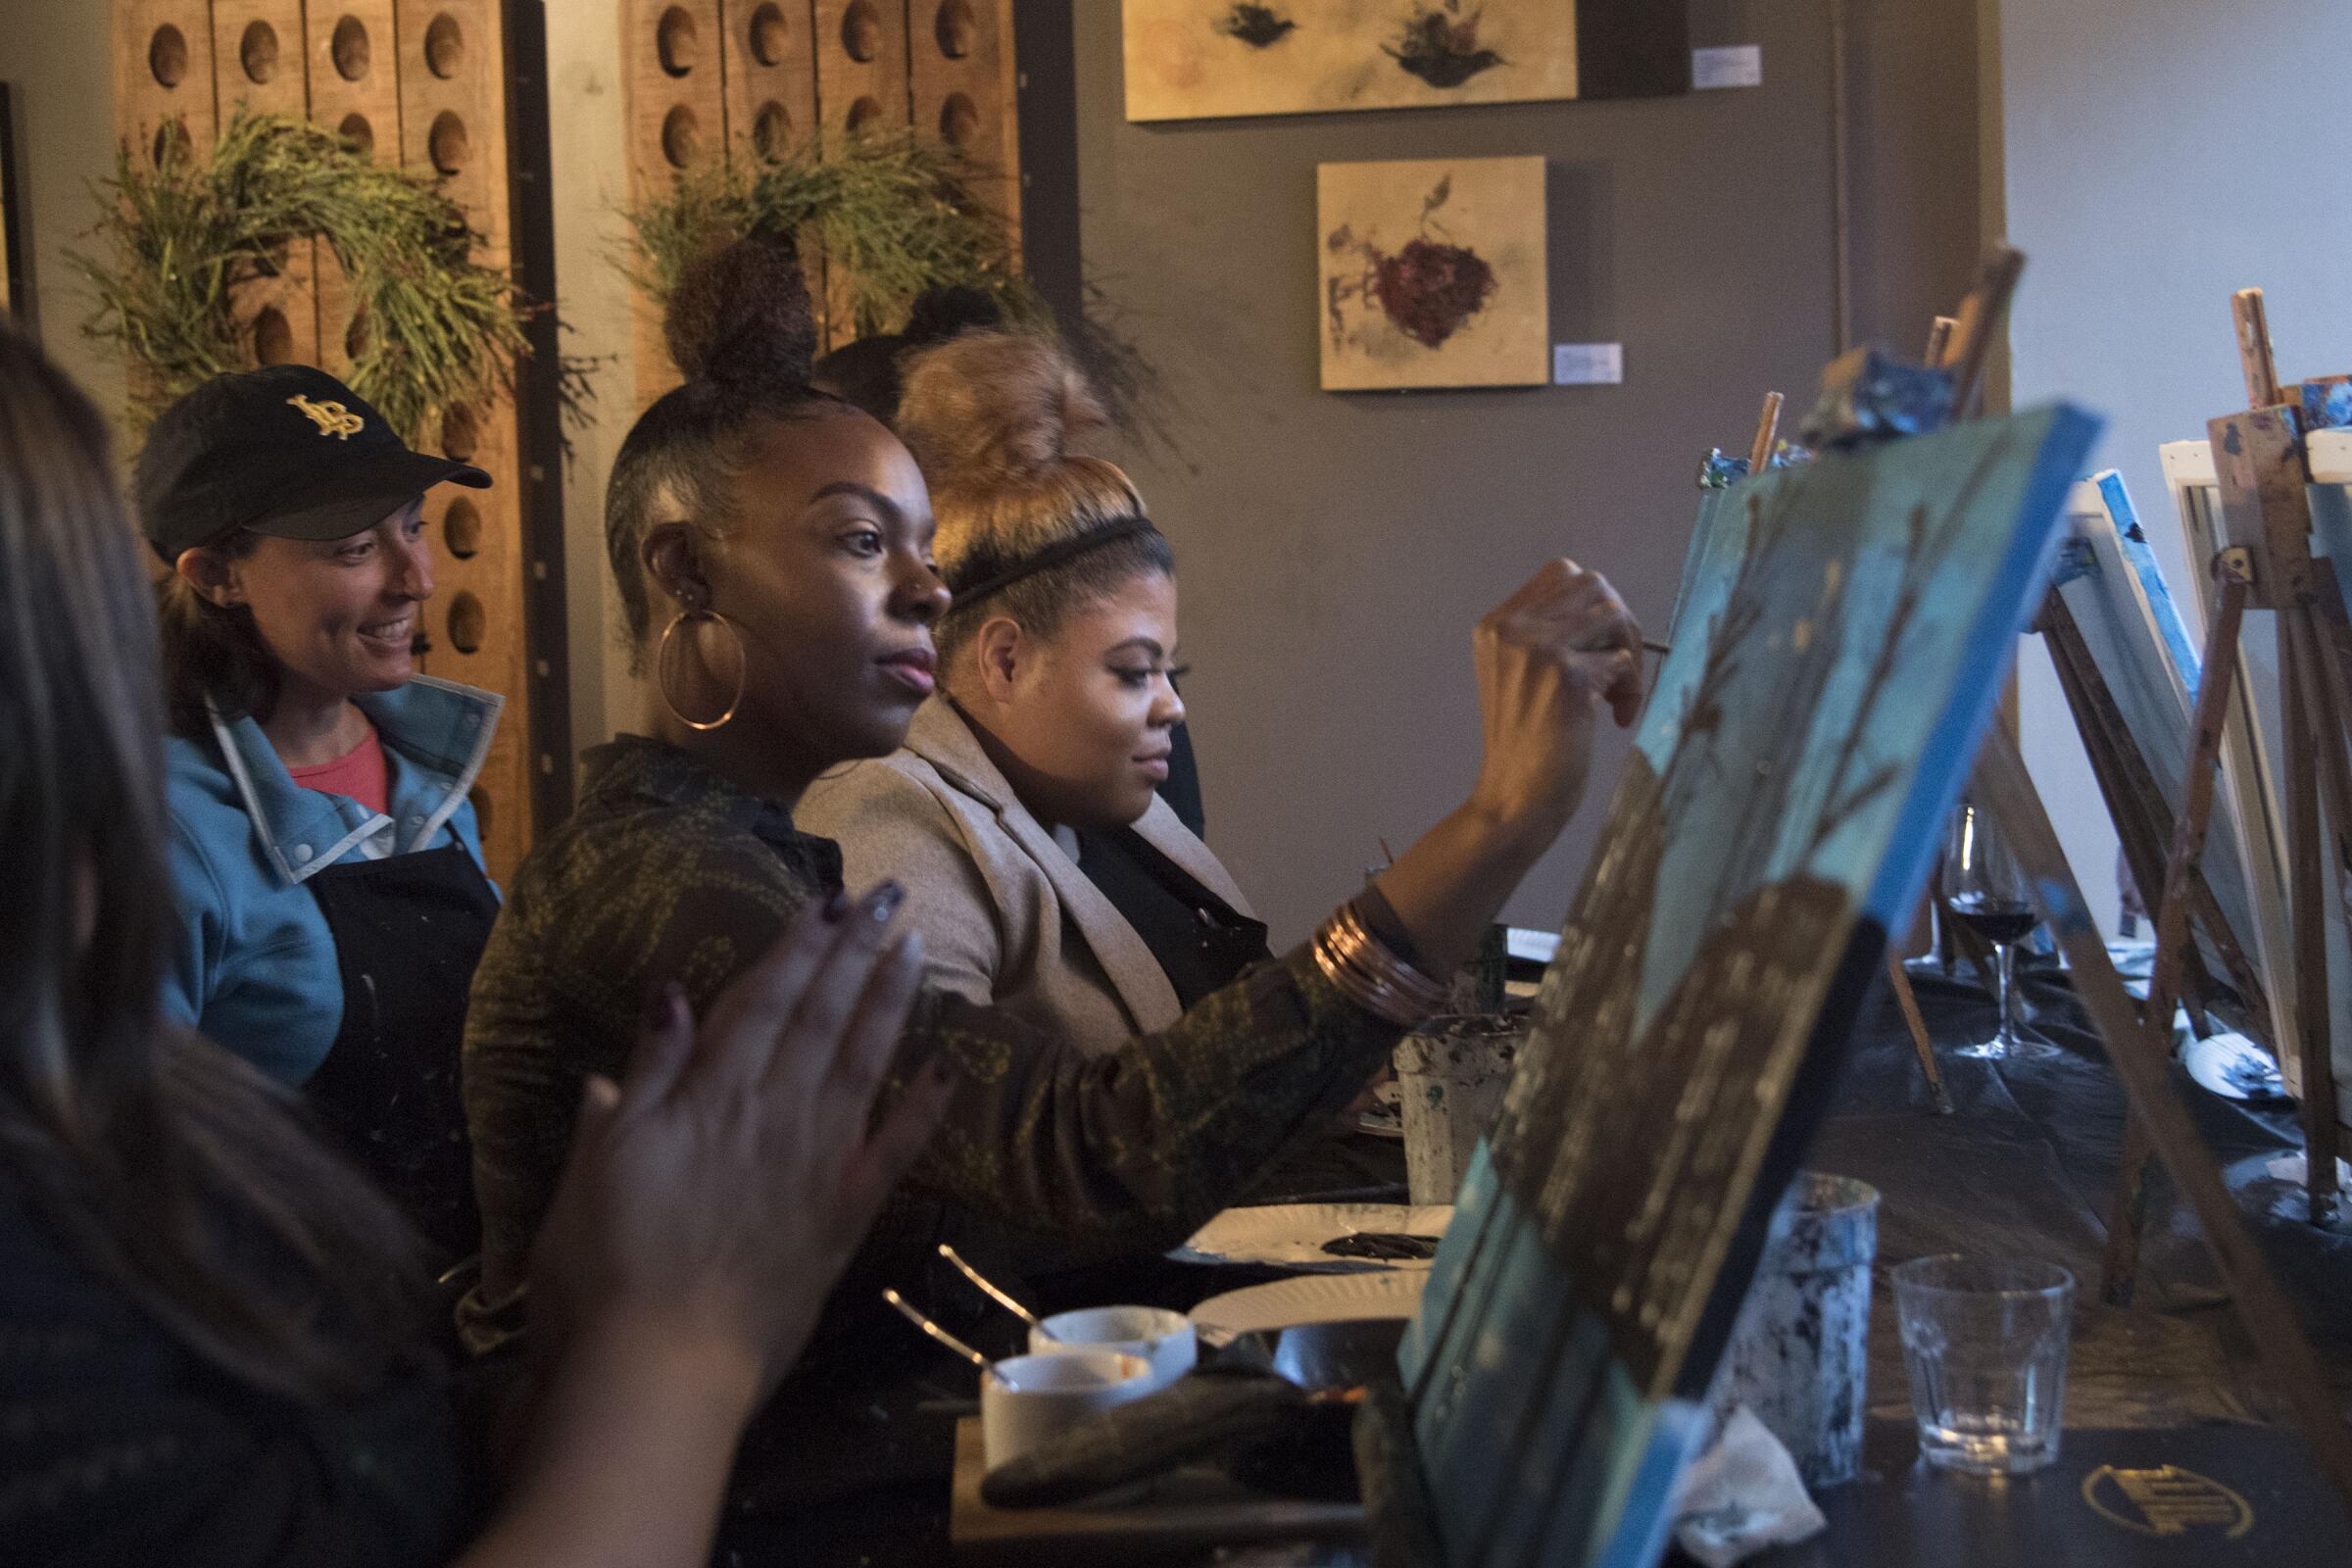 Candice Branch of Corona, center, and Janelle Tarver, right, of Rancho Cucamonga, learn to paint at District Wine with Brushstrokes and Beverages, which partners with area businesses to hold painting classes in Long Beach's East Village.